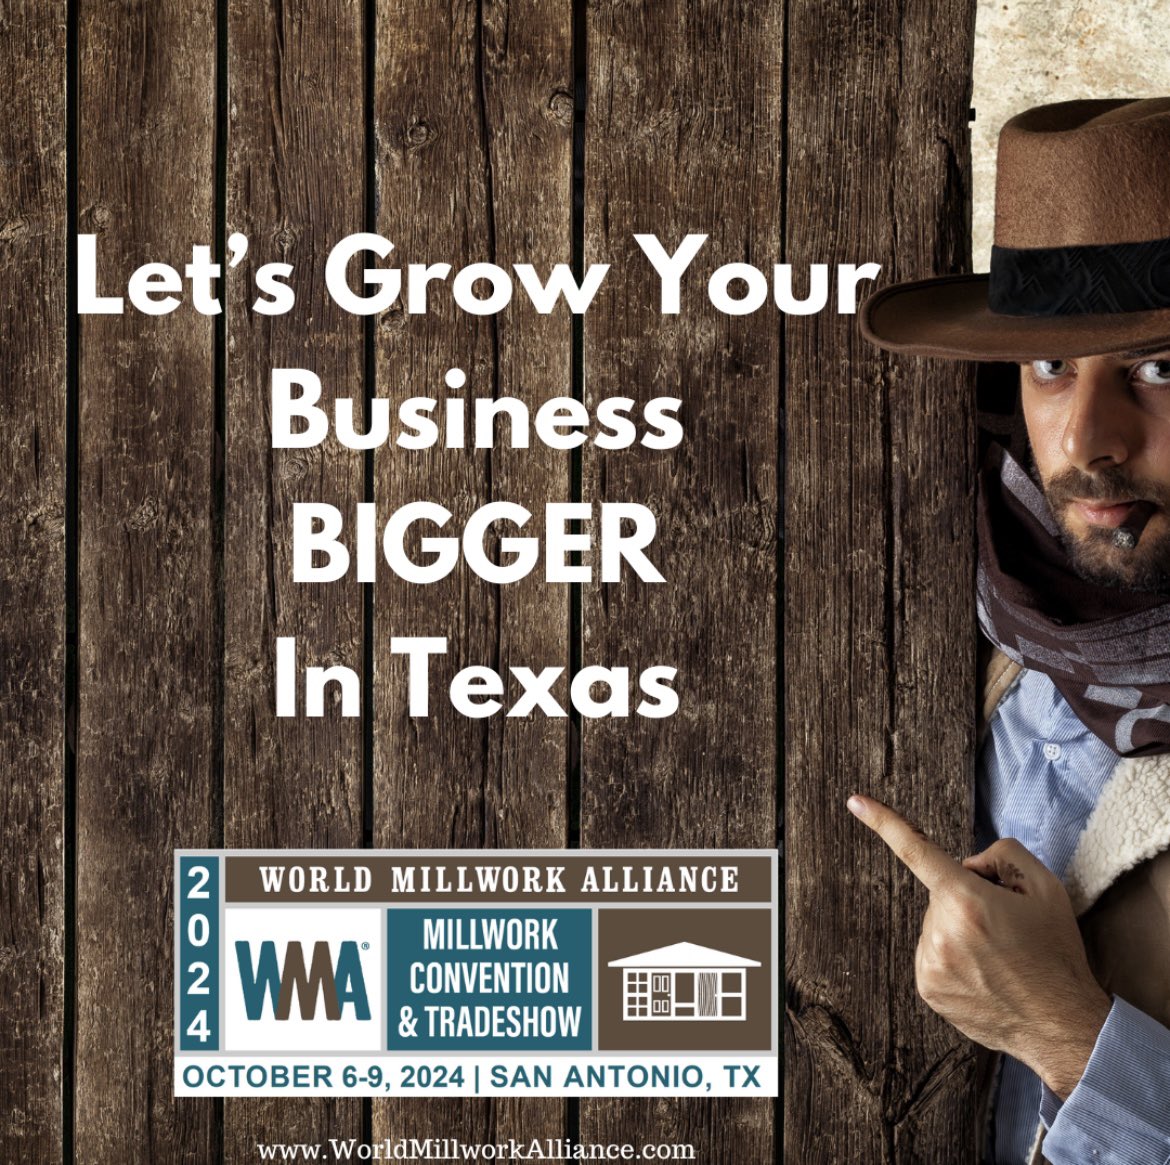 Get ready to GROW your Millwork business at the 2024 WMA Millwork Convention & Tradeshow in San Antonio, Texas, October 6-9, 2024!  Register for your BIG booth today and get ready for BIGGER success!
 
#2024WMAShow #WorldMillworkAlliance #WMA